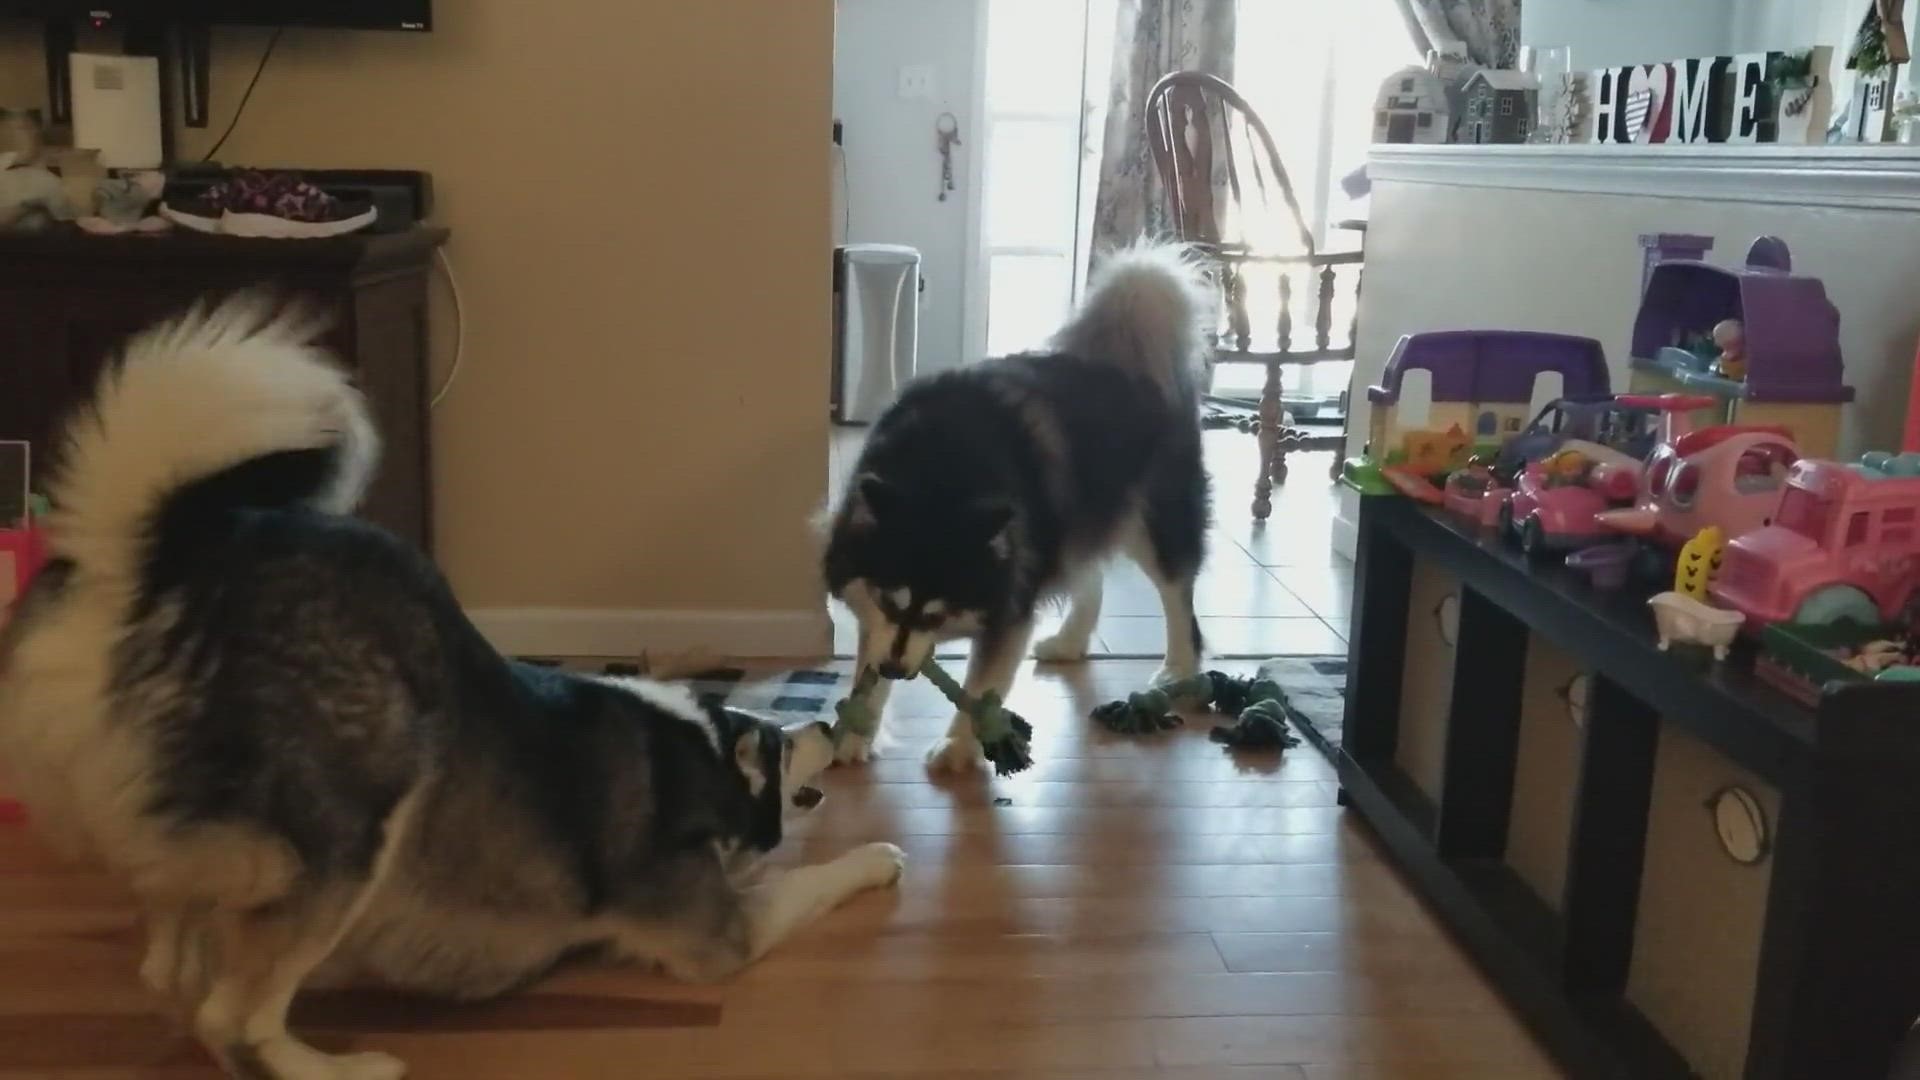 R.J.and his sister Xena playing tug of war with a rope toy.
Credit: Douglas Wilson